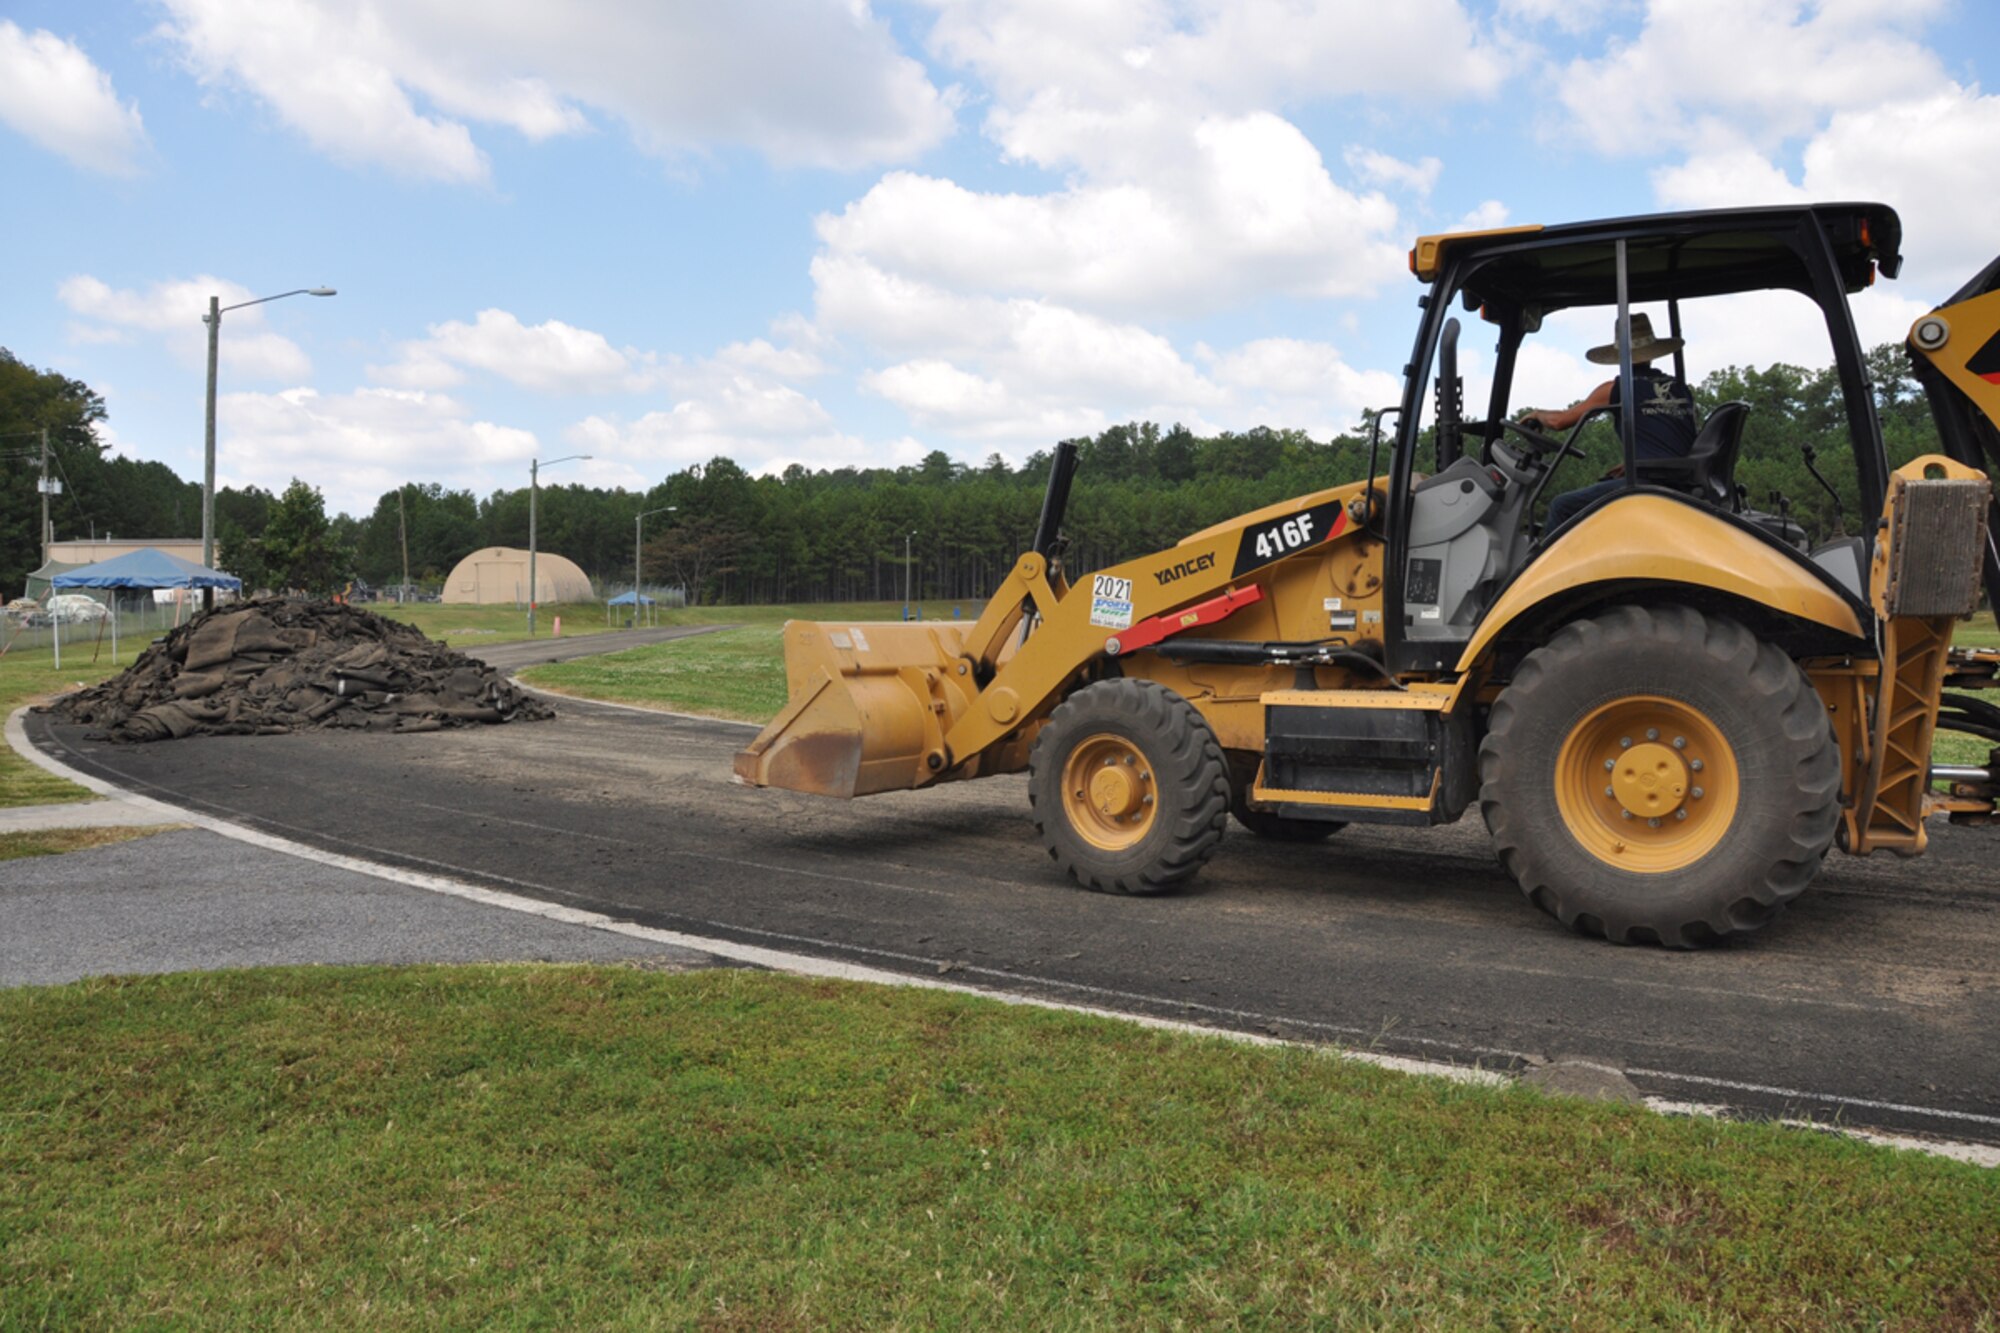 A contractor uses a front end loader to remove the surface of the track at Dobbins Air Reserve Base, Ga. Sept. 27, 2017. The renovation process lasted about a month as crews worked quickly to have it repaved and restriped. (U.S. Air Force photo/Master Sgt. James Branch)